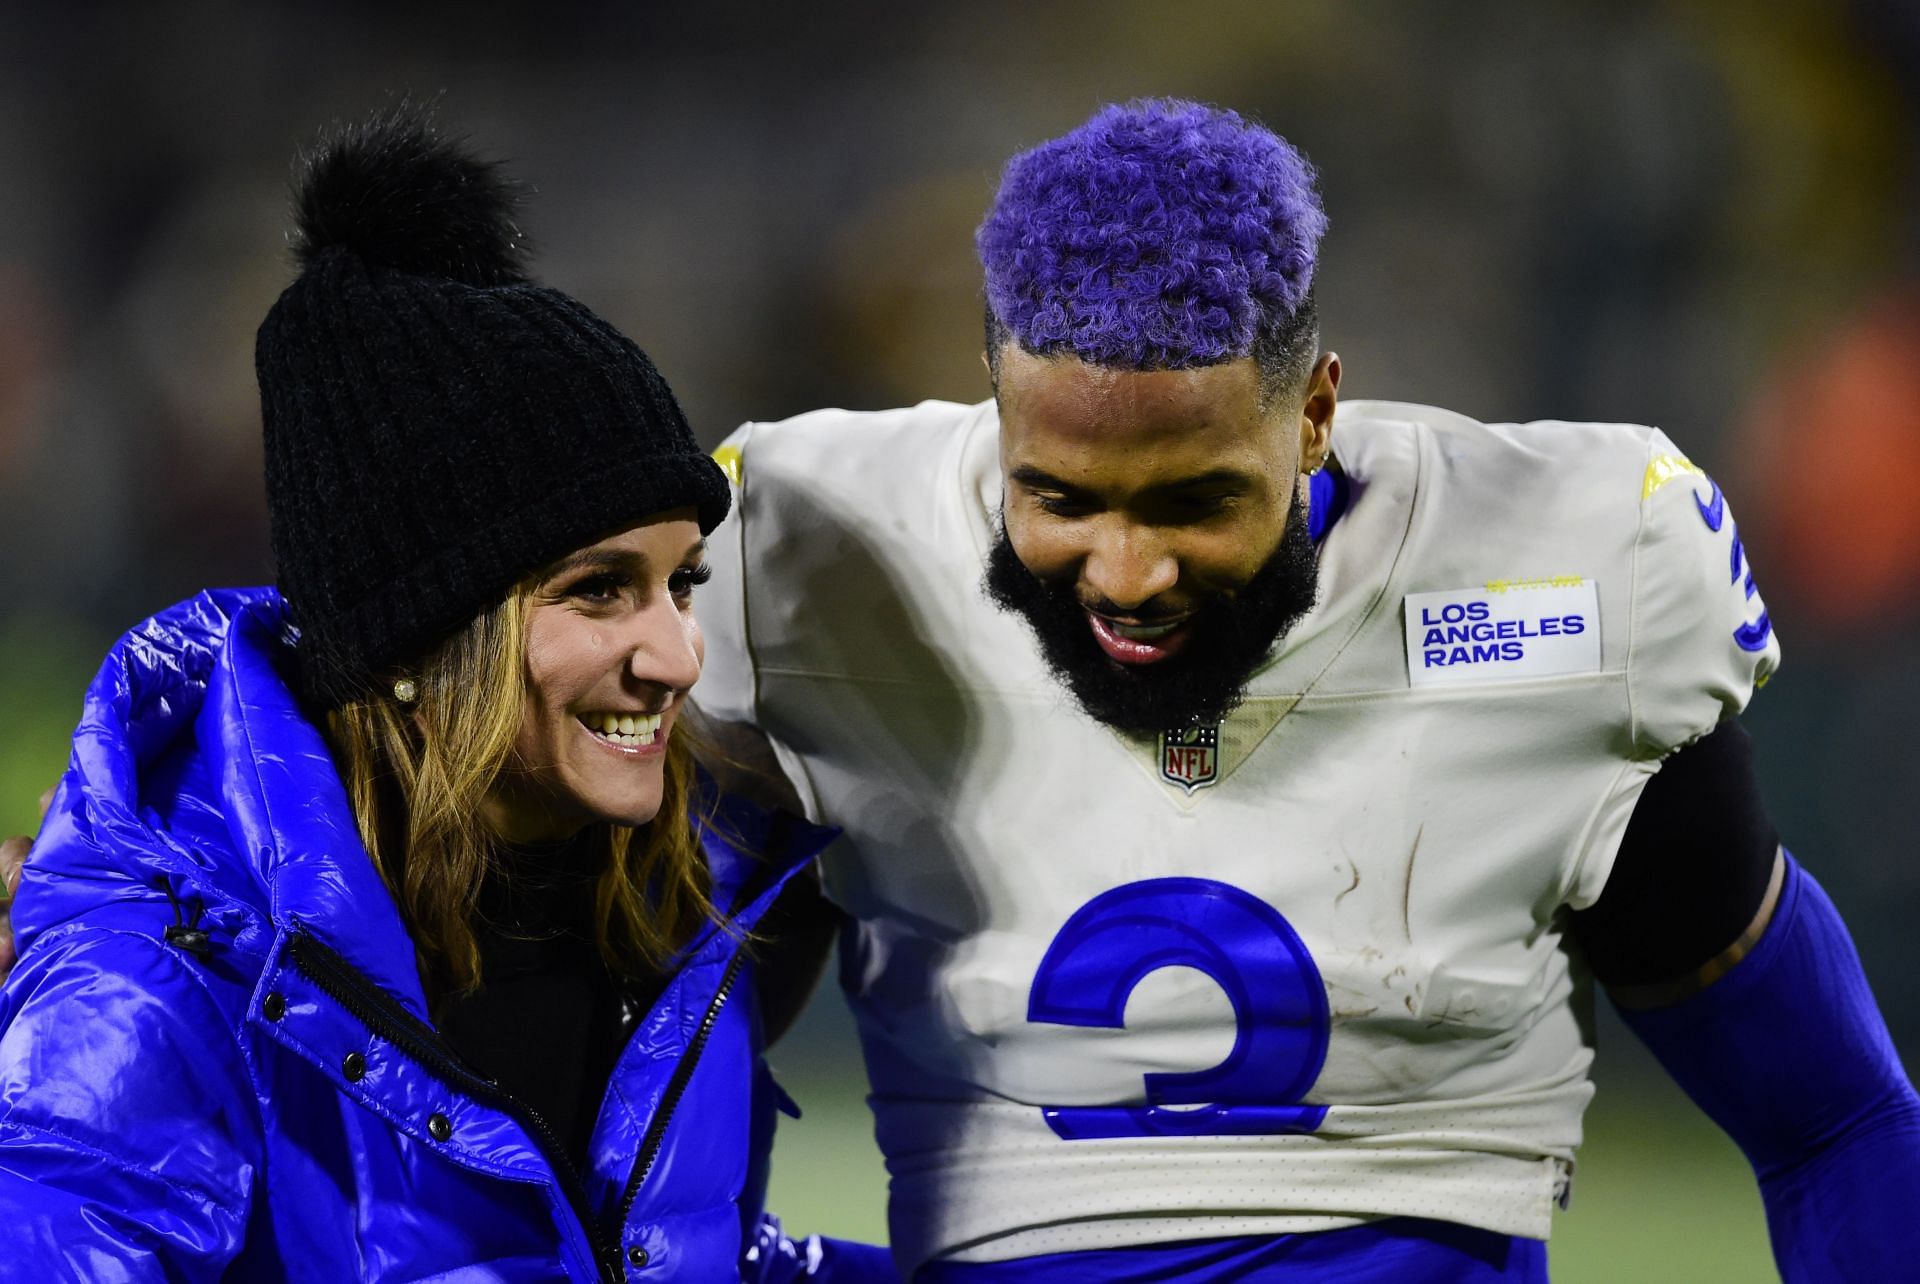 Odell Bekcham Jr. was able to share a smile with Erin Andrews, but the Rams&#039; recent play has been no laughing matter (Photo: Getty)